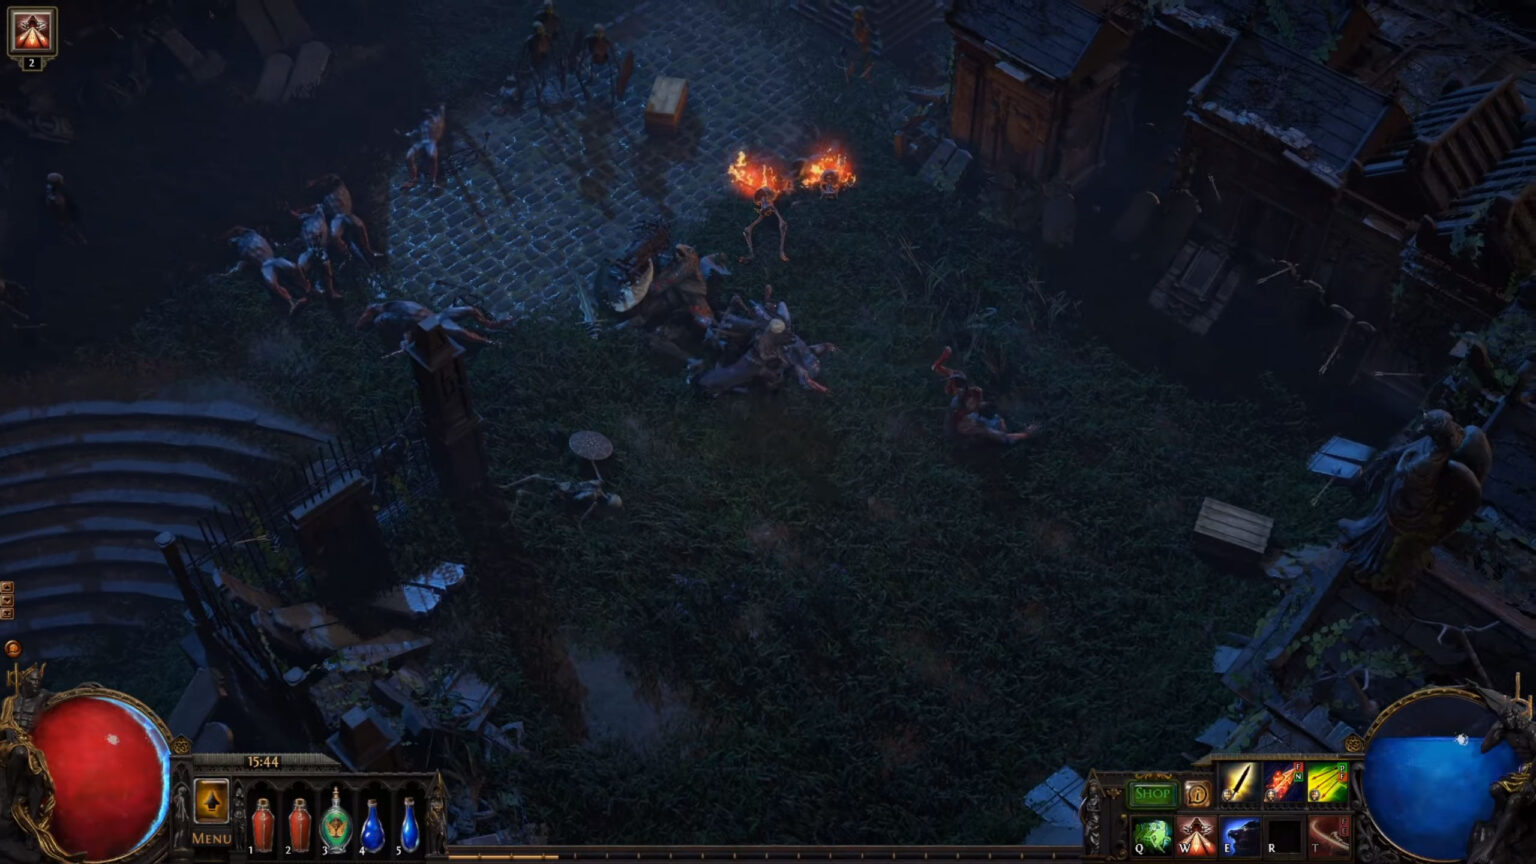 path of exile 2 cheats